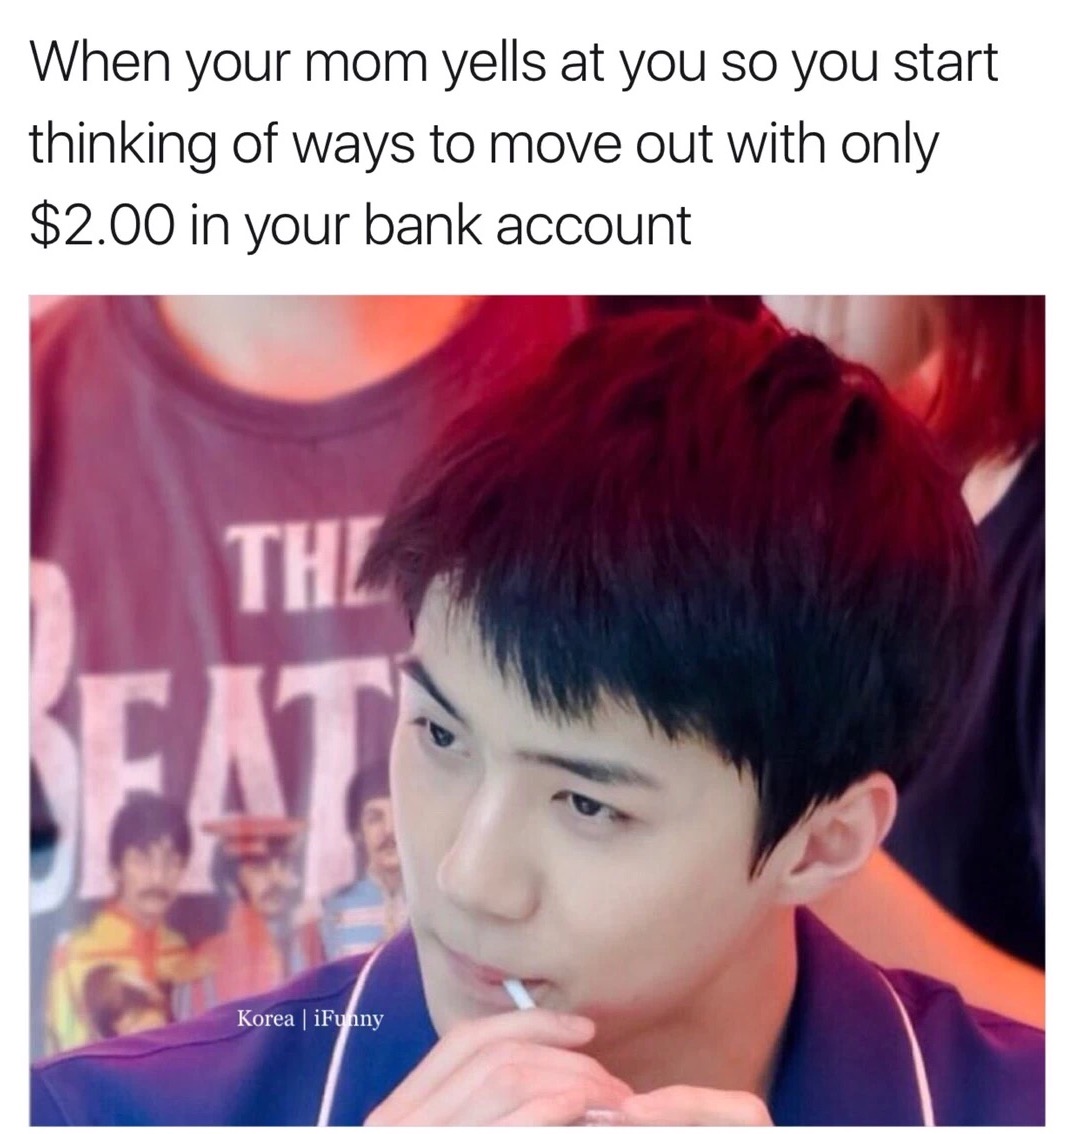 meme stream - hairstyle - When your mom yells at you so you start thinking of ways to move out with only $2.00 in your bank account Thz Seat Korea | iFunny